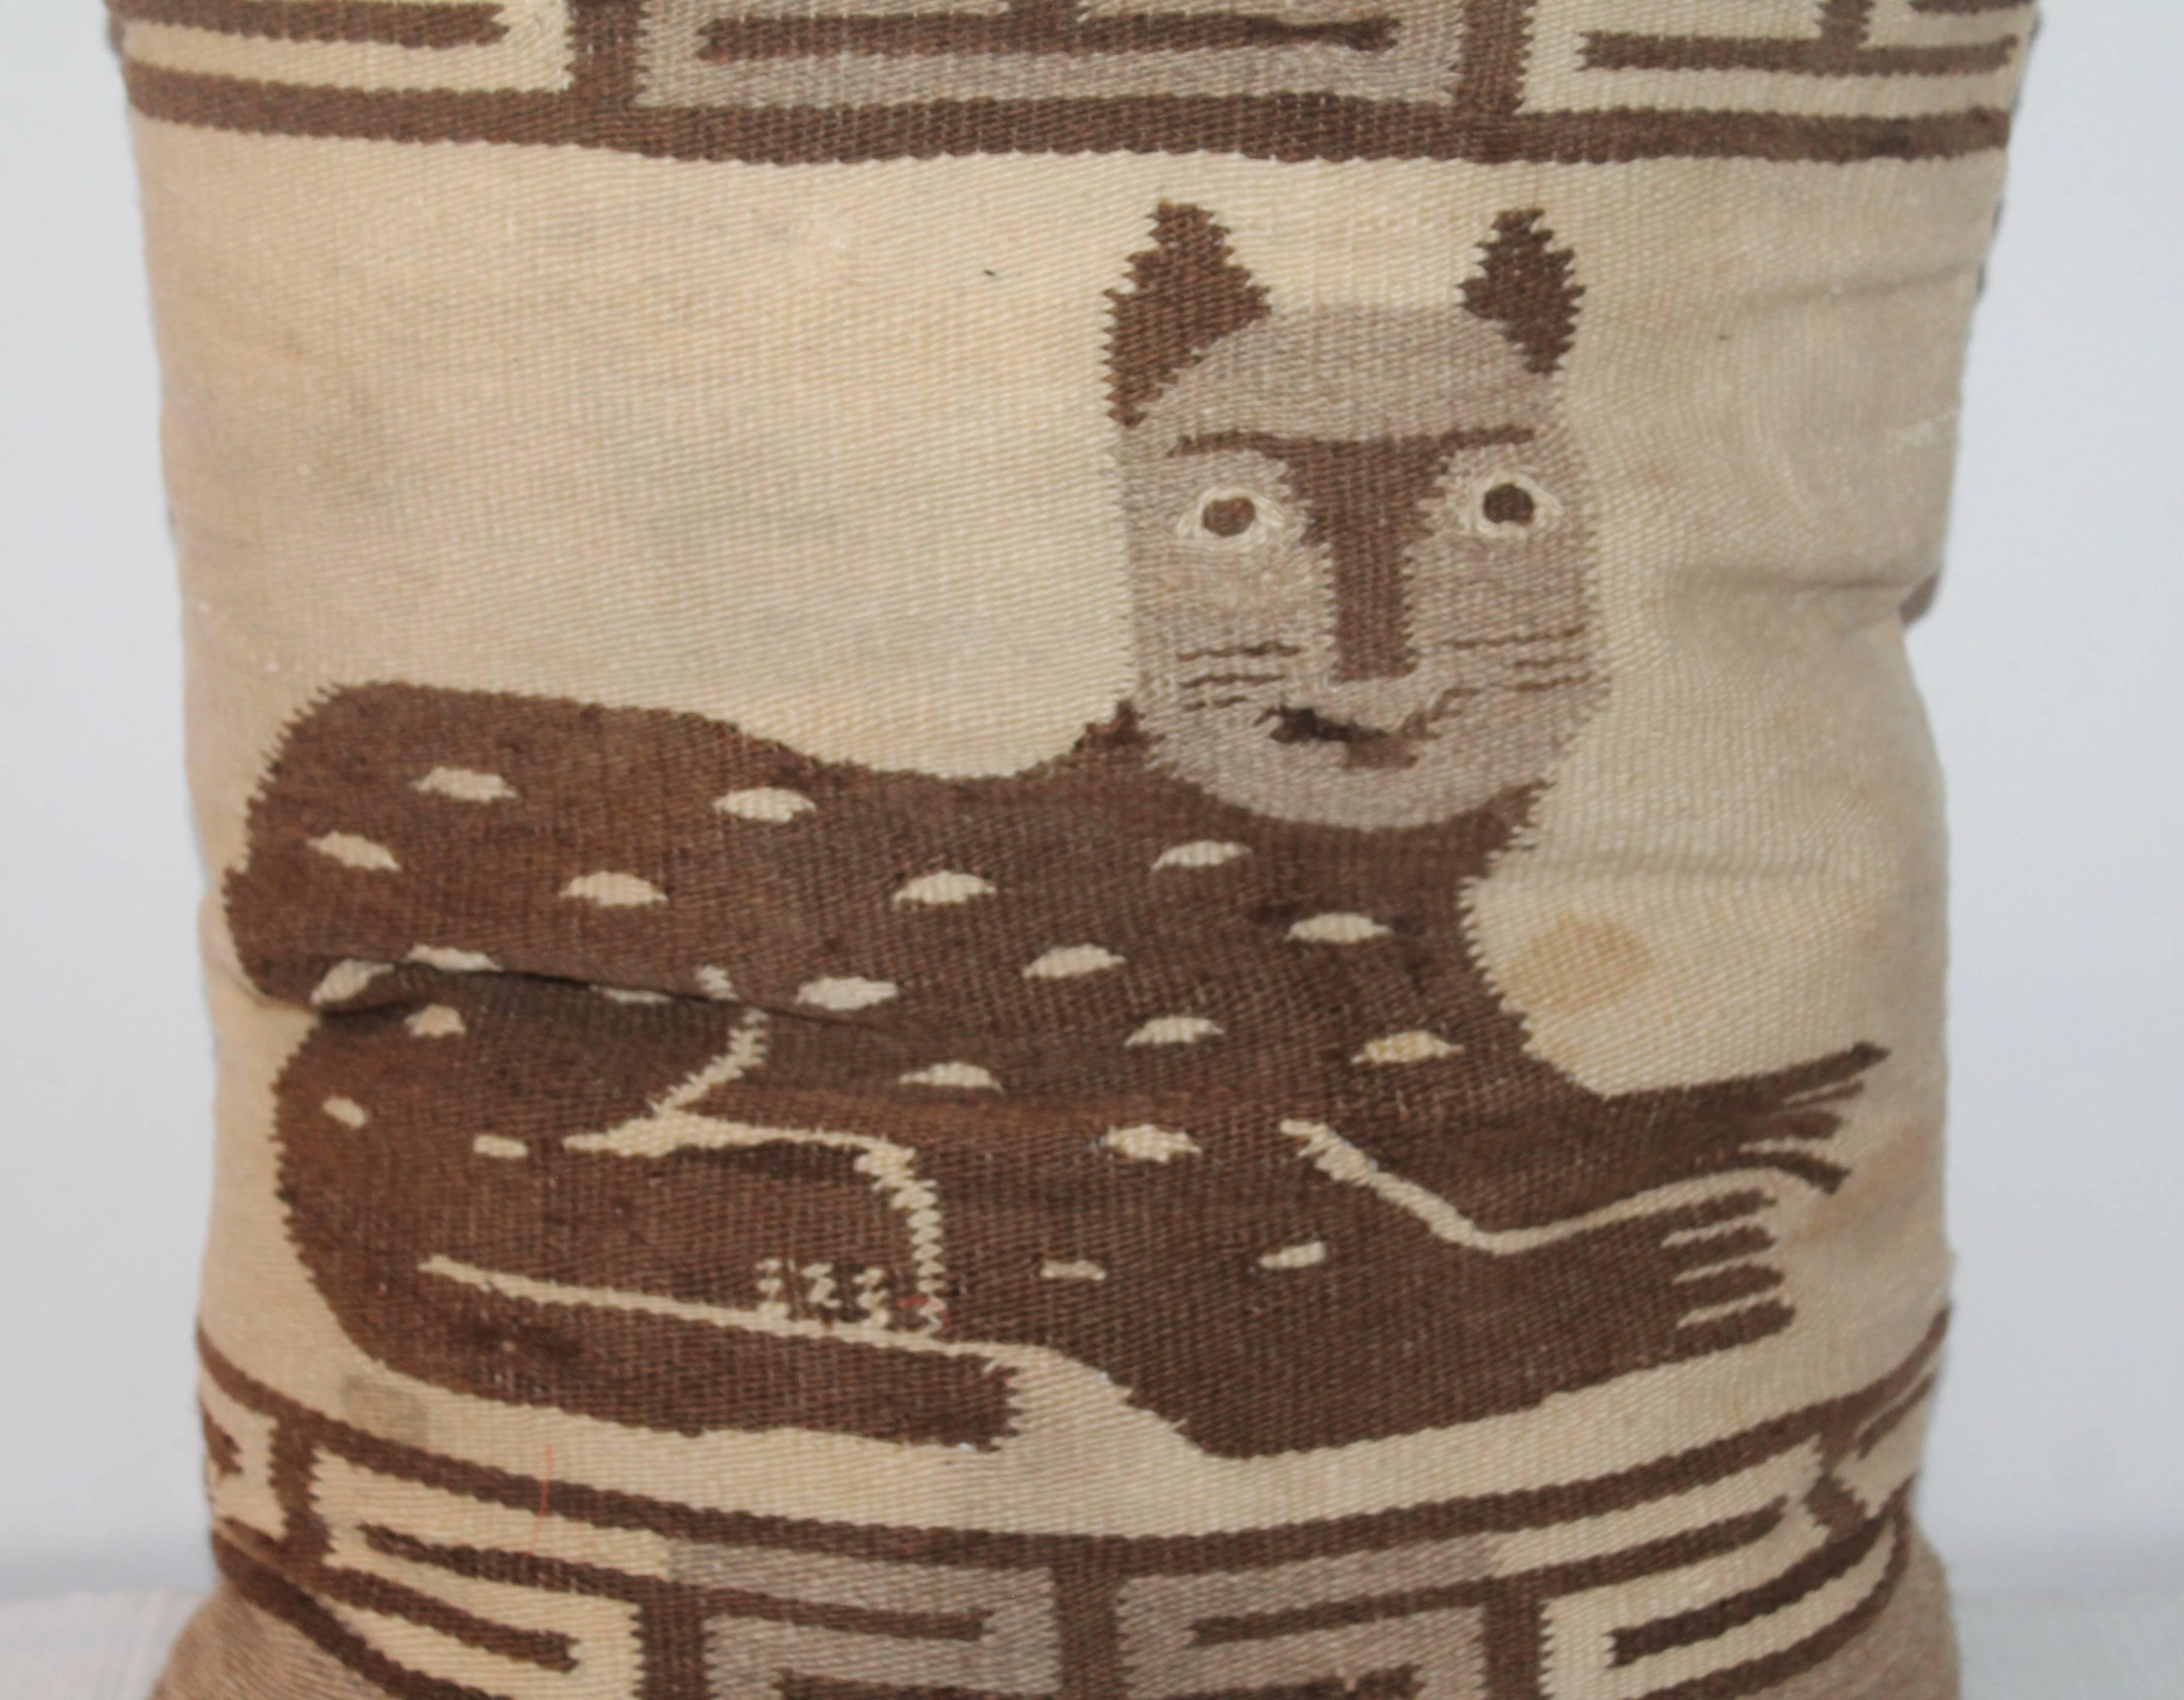 This large amazing handwoven Indian weaving cat pillow is so folky and looks very Americana. This is quite rare for an Indian weaving. The condition is good with minor spots consistent with age and use. The backing is in a tan cotton linen. The